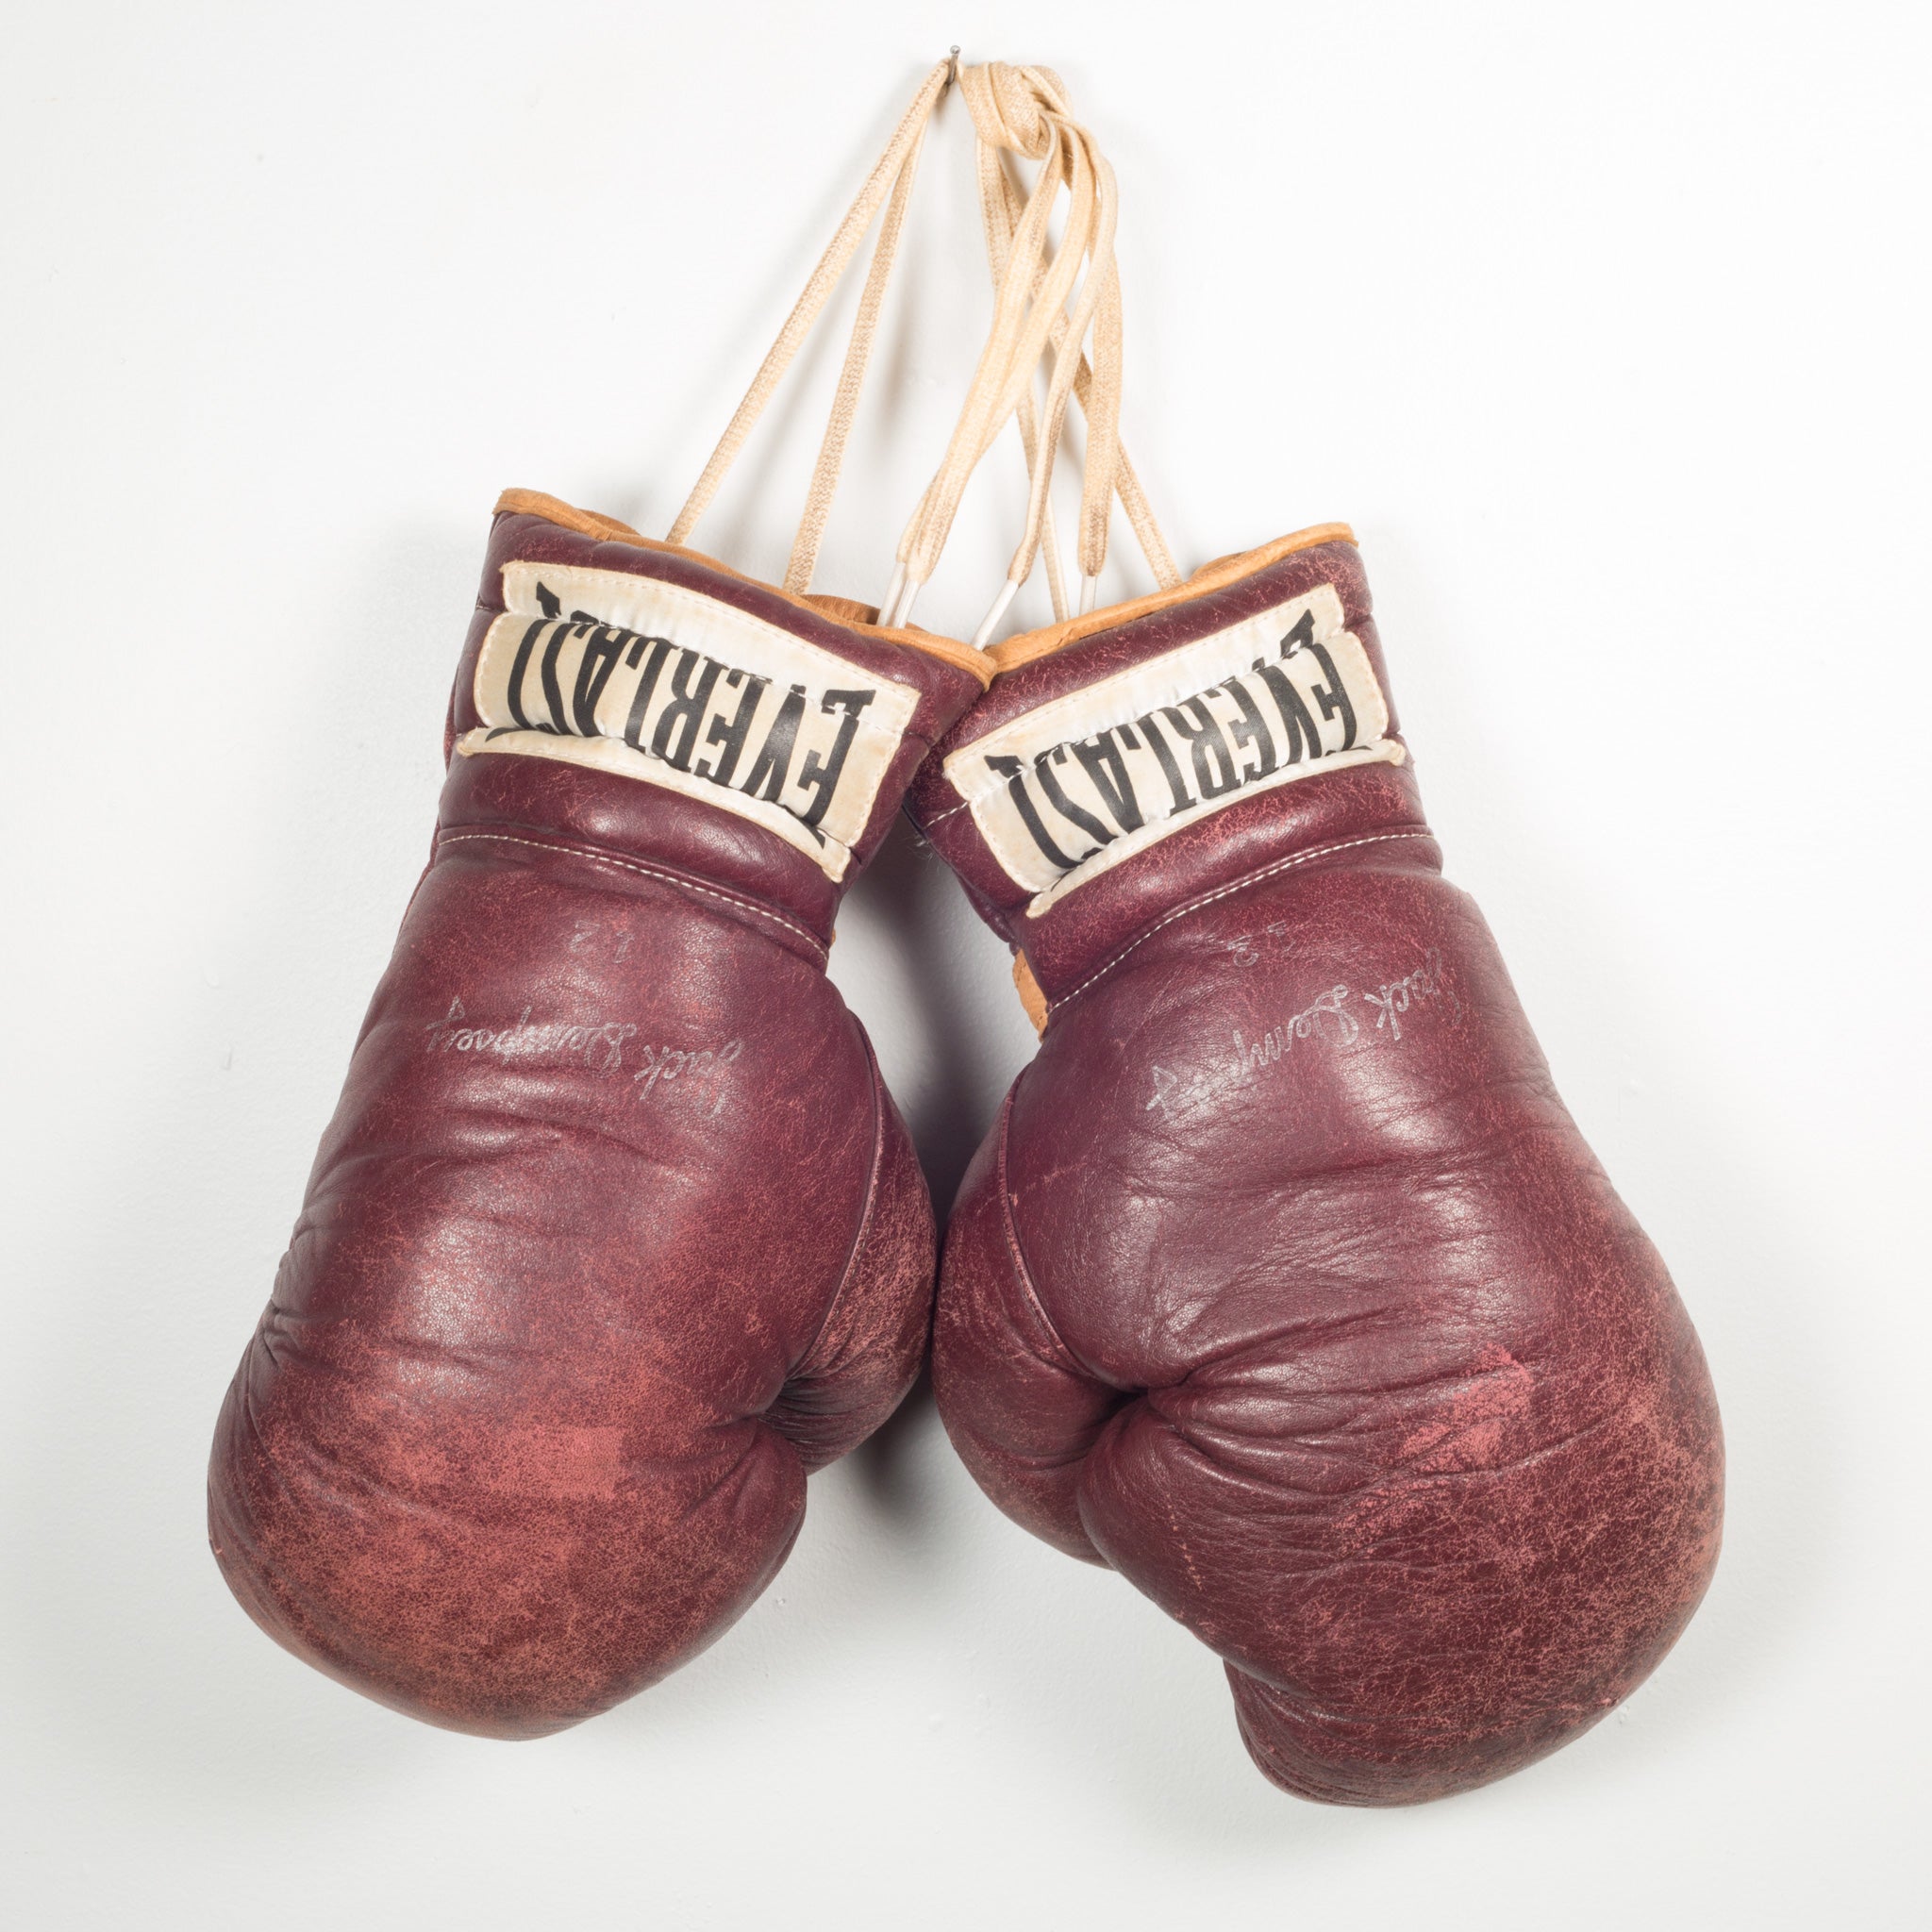 Leather Everlast Boxing Gloves c.1960 S16 Home